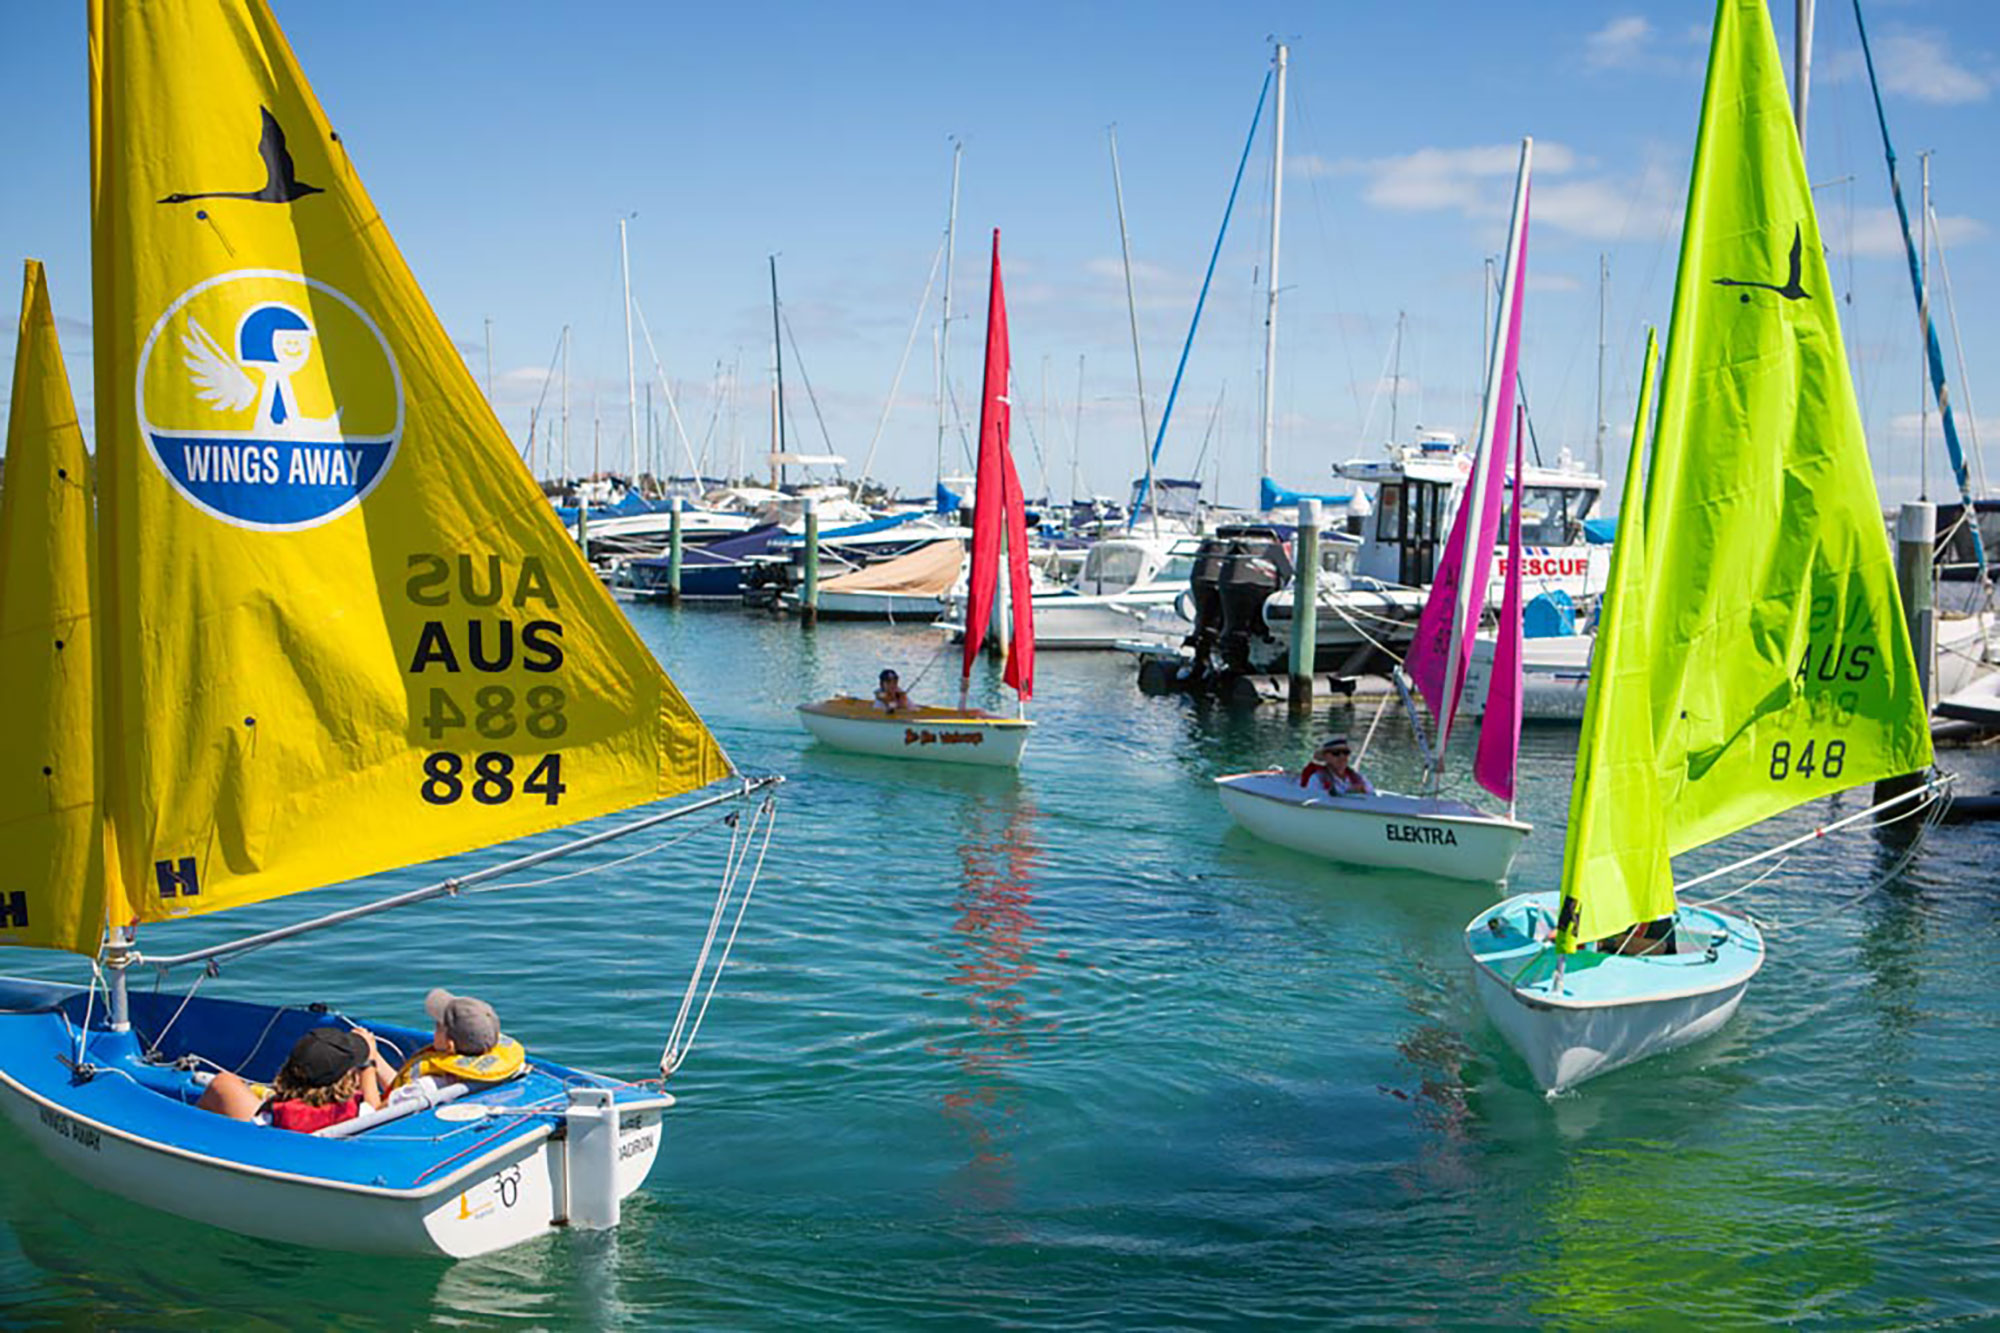 blairgowrie yacht club boats for sale